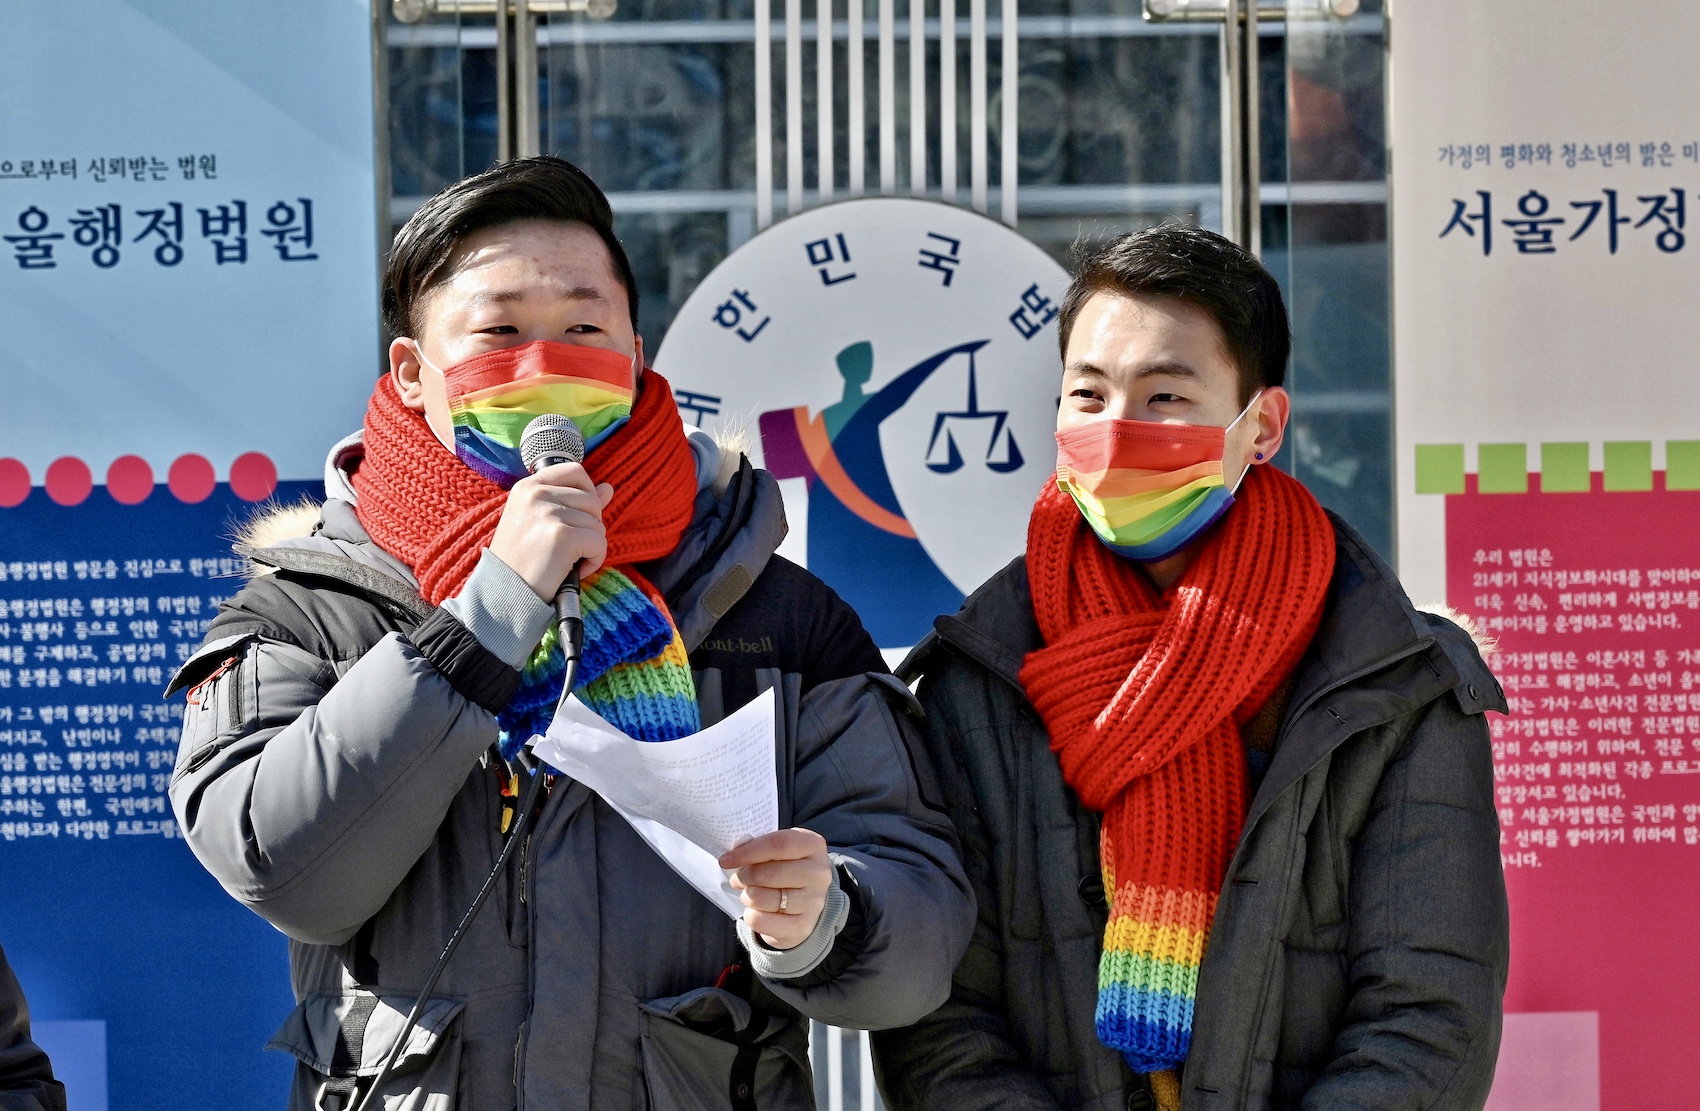 South Korean same-sex couple So Seong-wook (L) and Kim Yong-min (R) attend a press conference